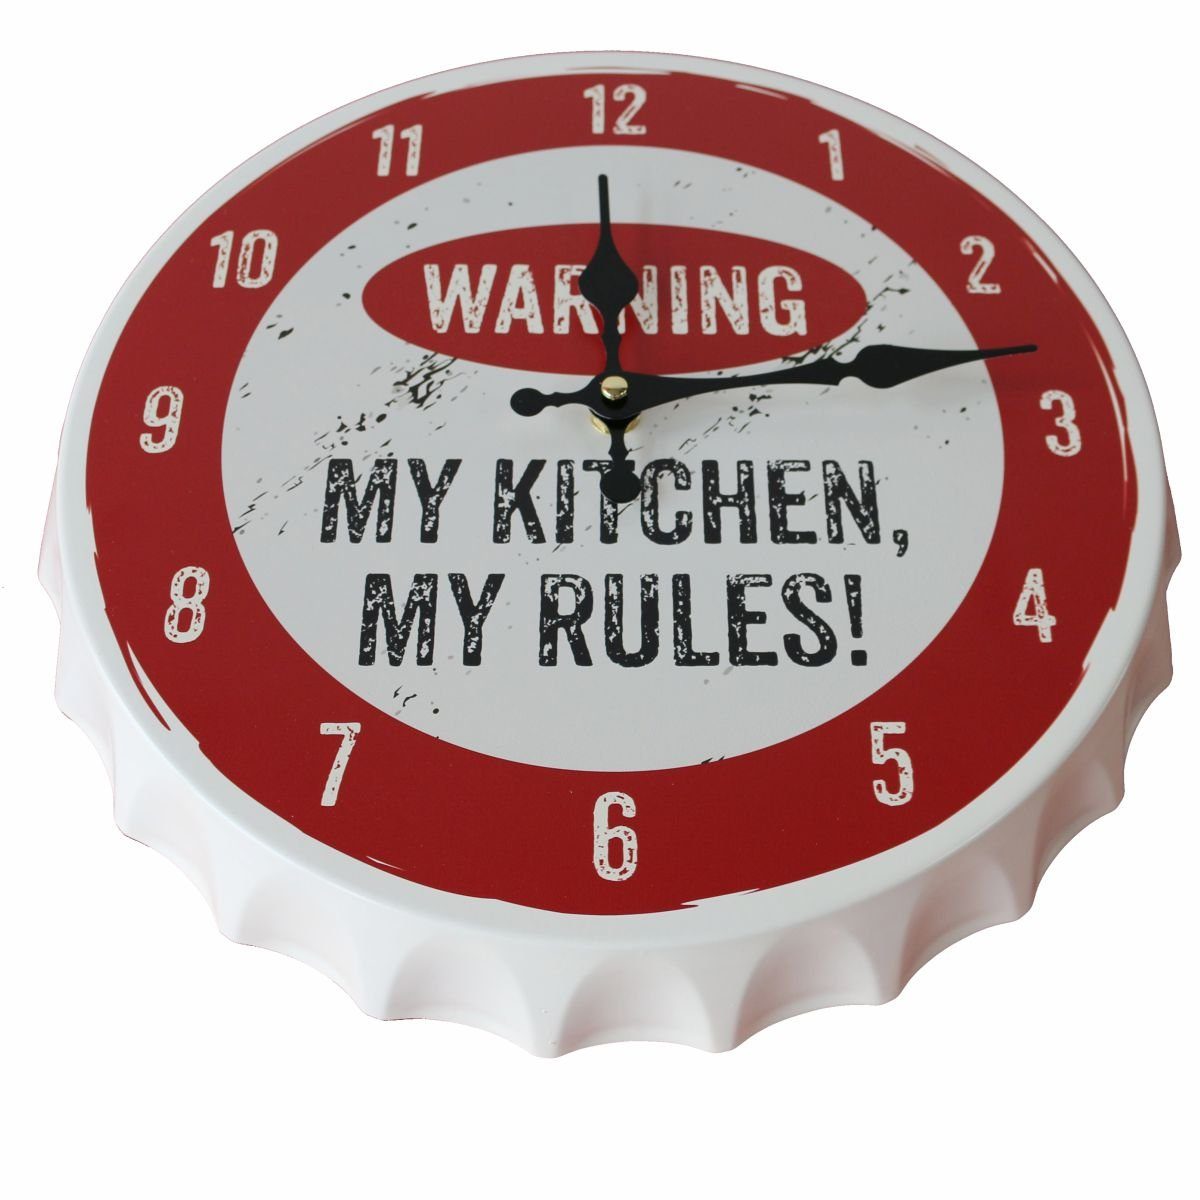 Contento Wanduhr 440s Wanduhr CROWNS MY KITCHEN MY RULES! Metall